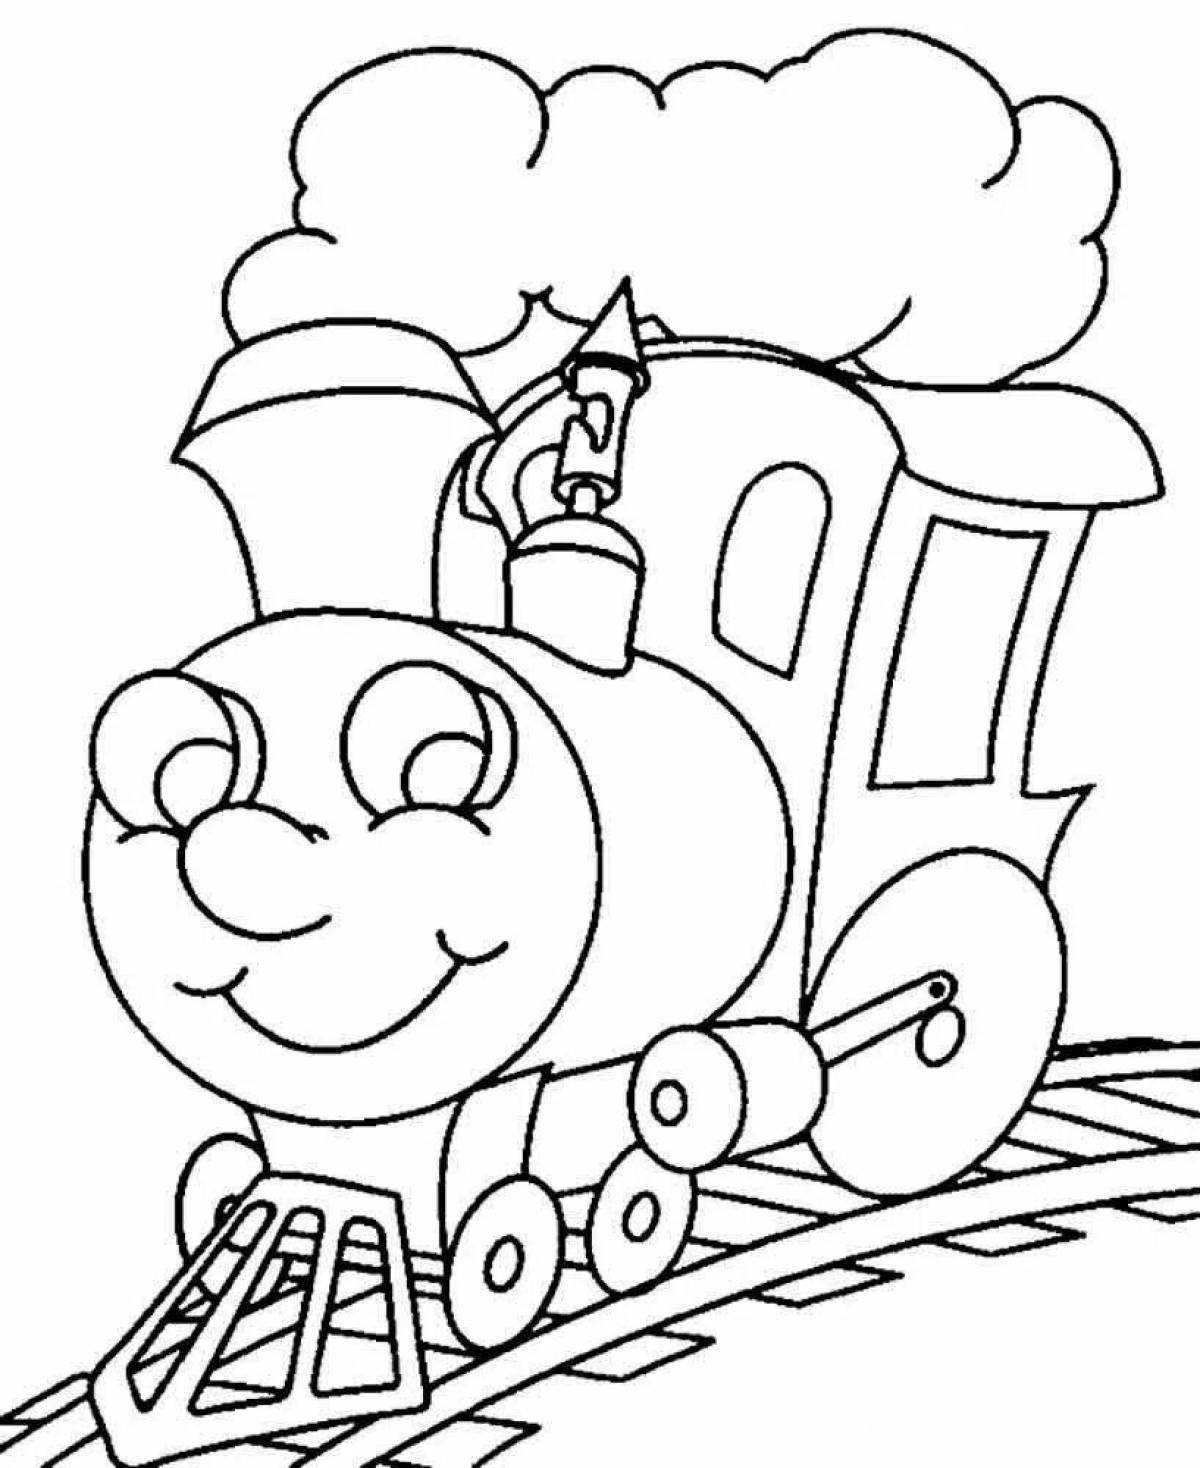 Coloring book for kids train filled with flowers